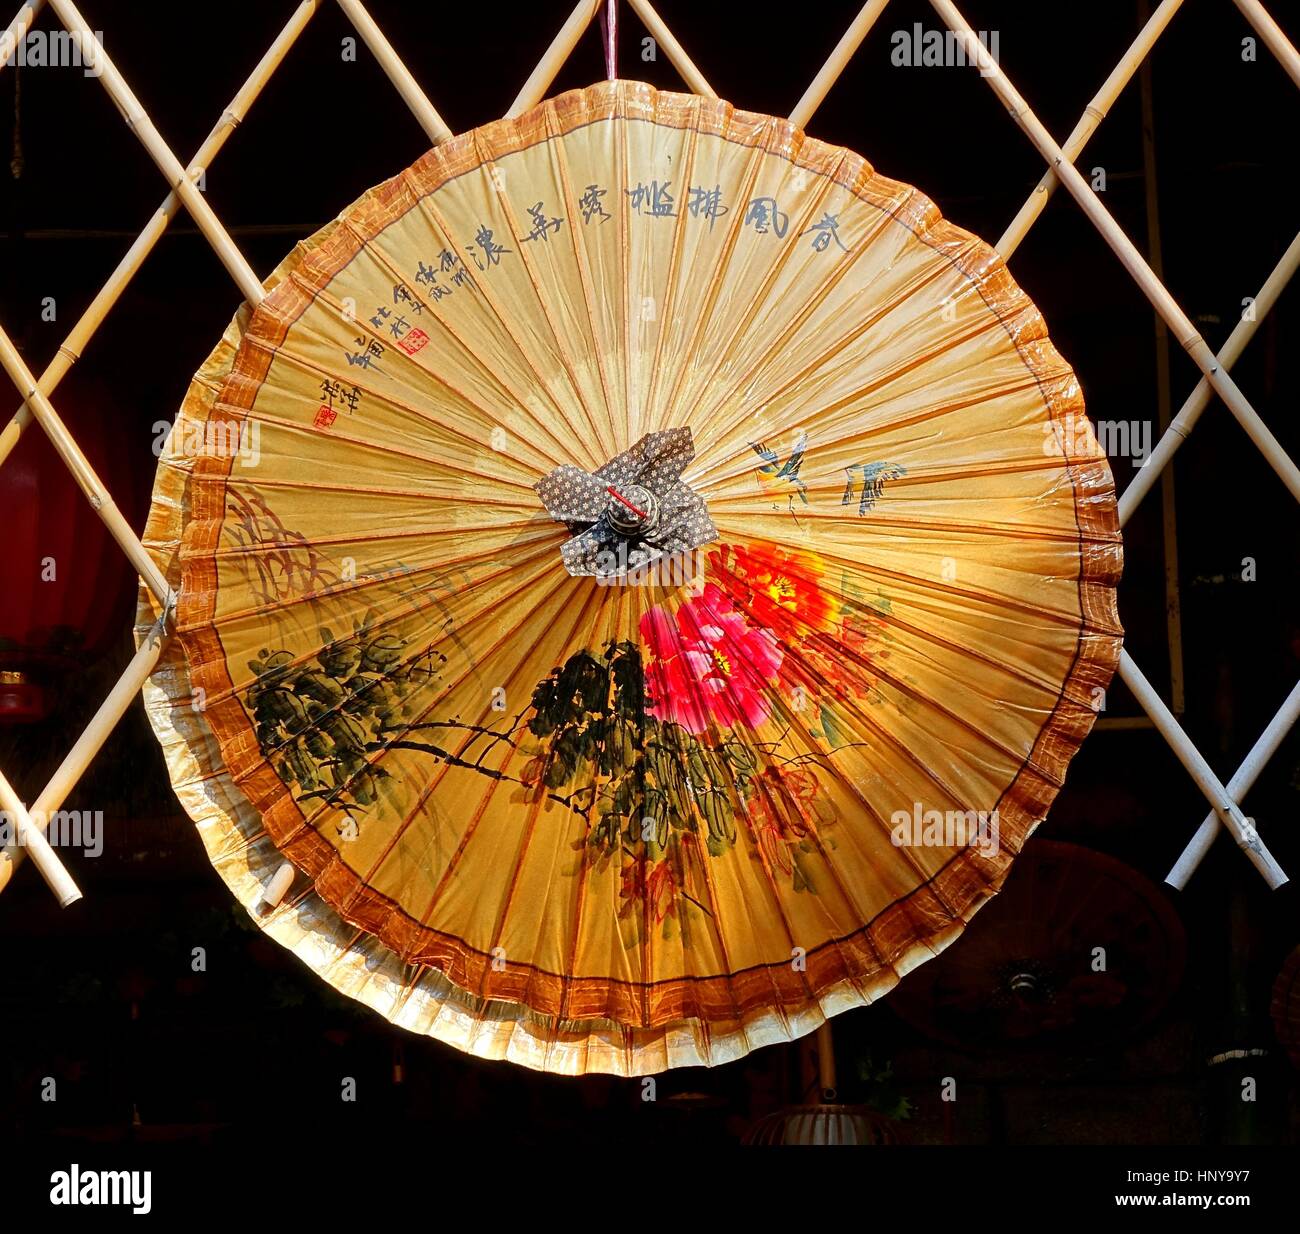 KAOHSIUNG, TAIWAN -- JULY 24, 2016: A hand-painted oil-paper umbrella, which is a traditional art and craft product by the Chinese Hakka people. Stock Photo